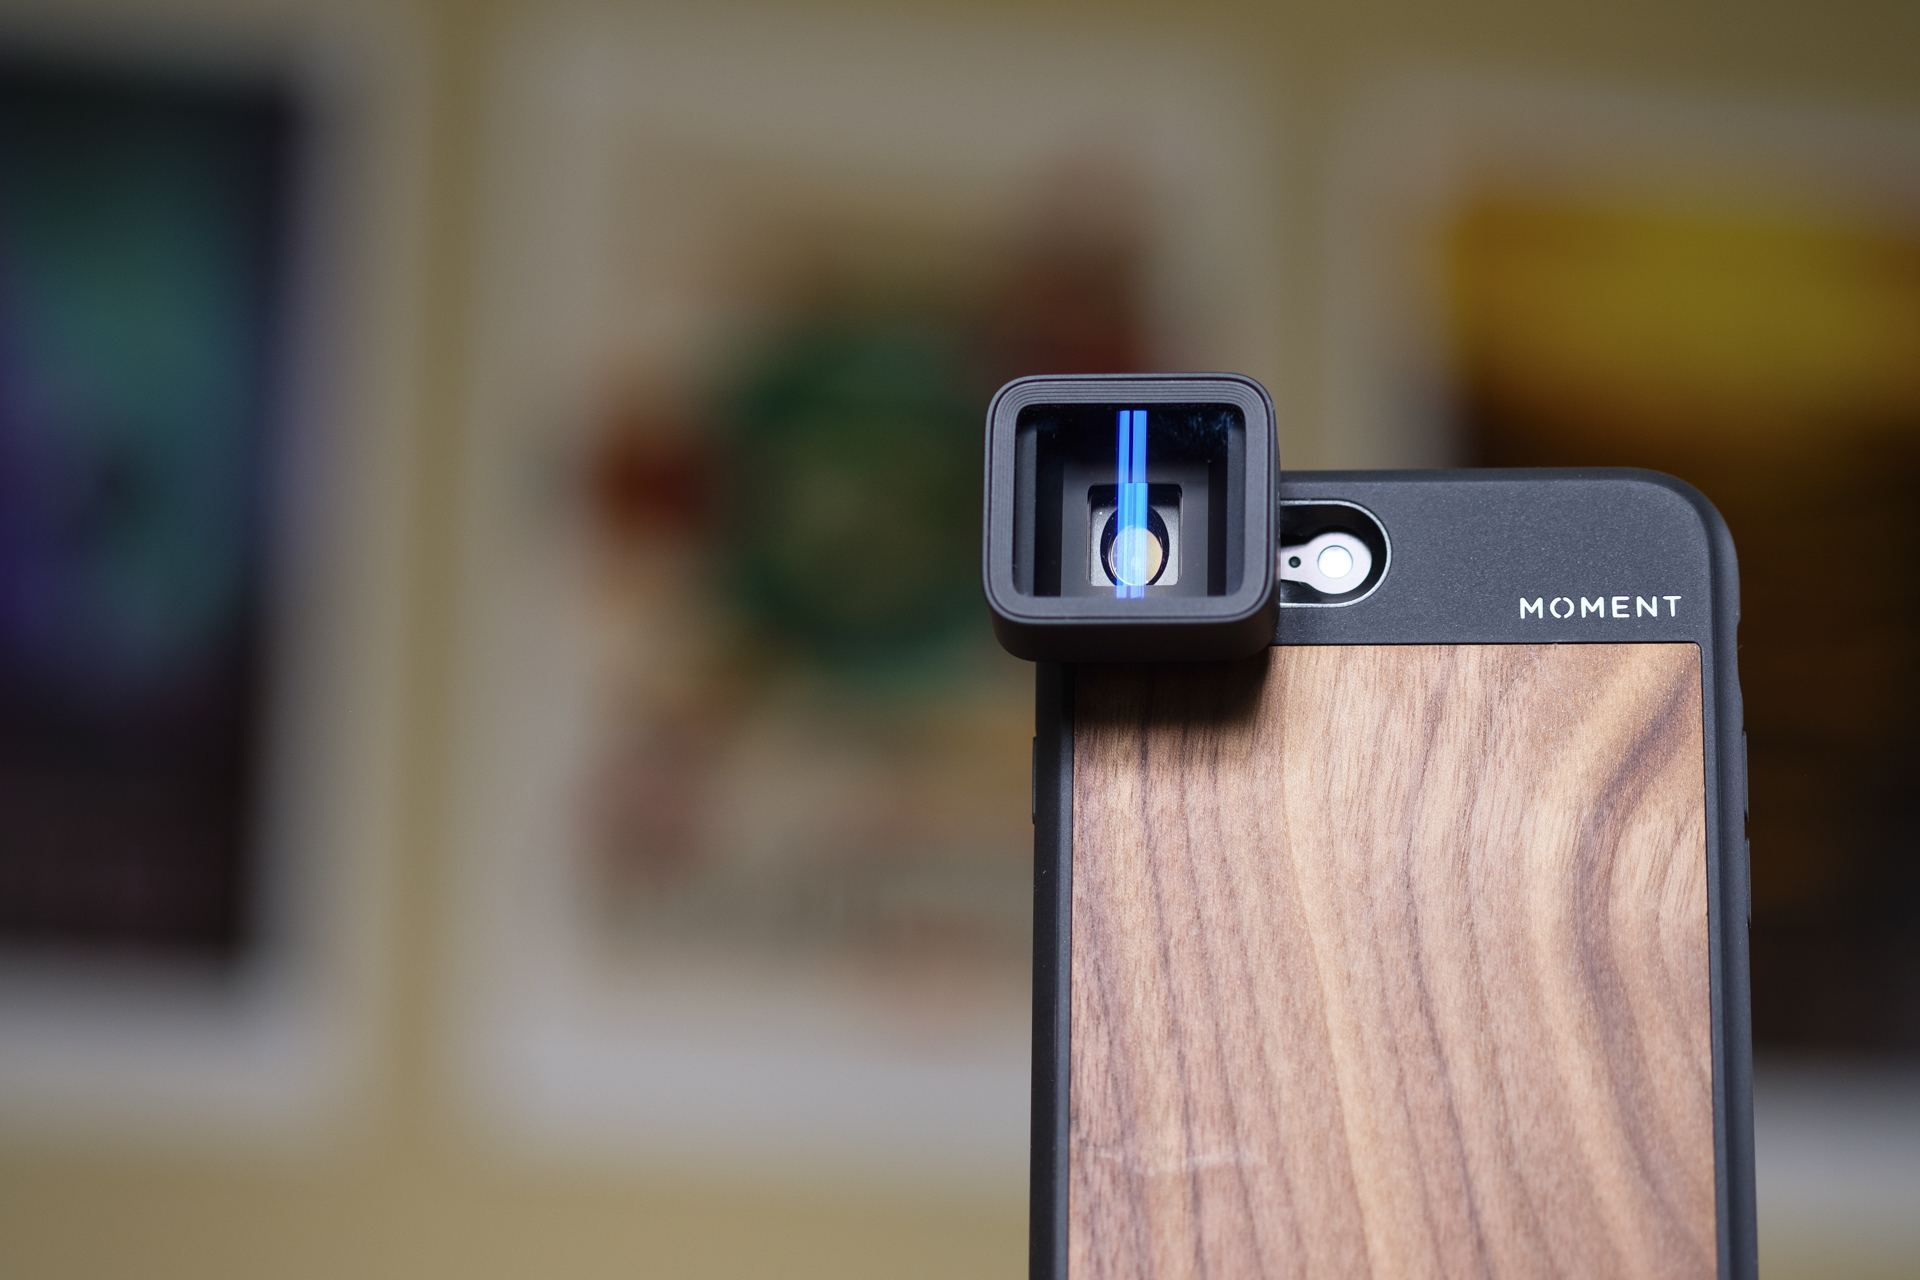 Moment Anamorphic Lens Turns Your Phone Into a Cinema Camera